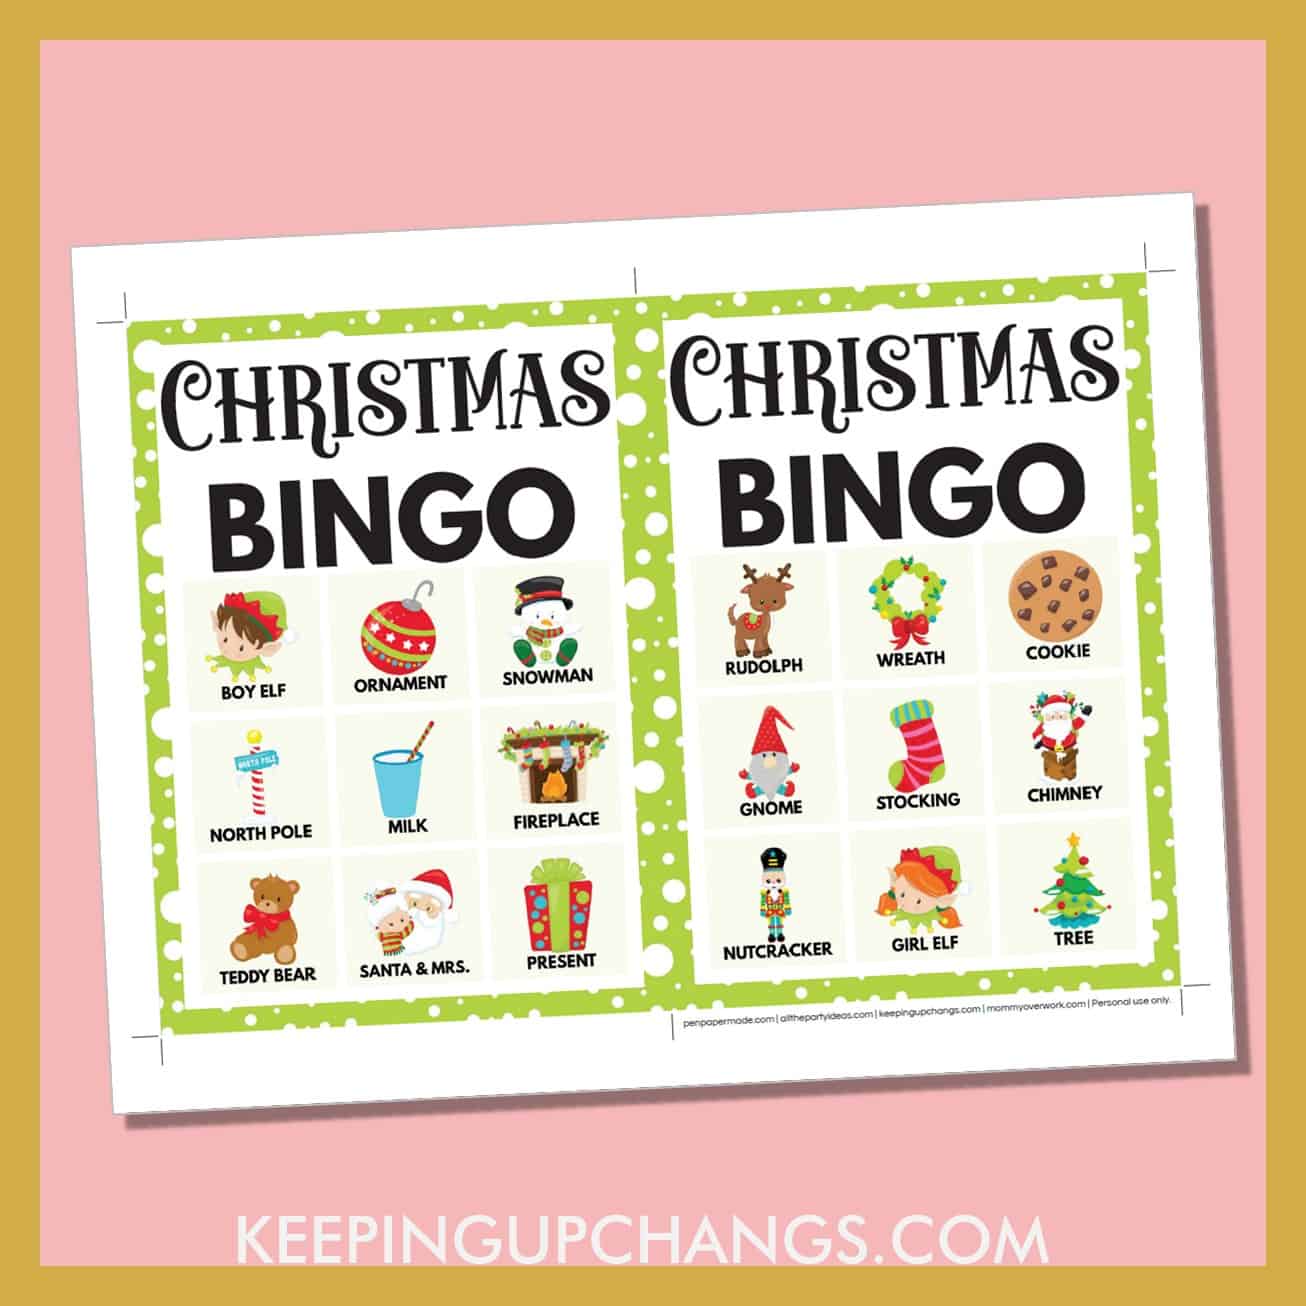 free christmas bingo card 3x3 5x7 game boards with images and text words.